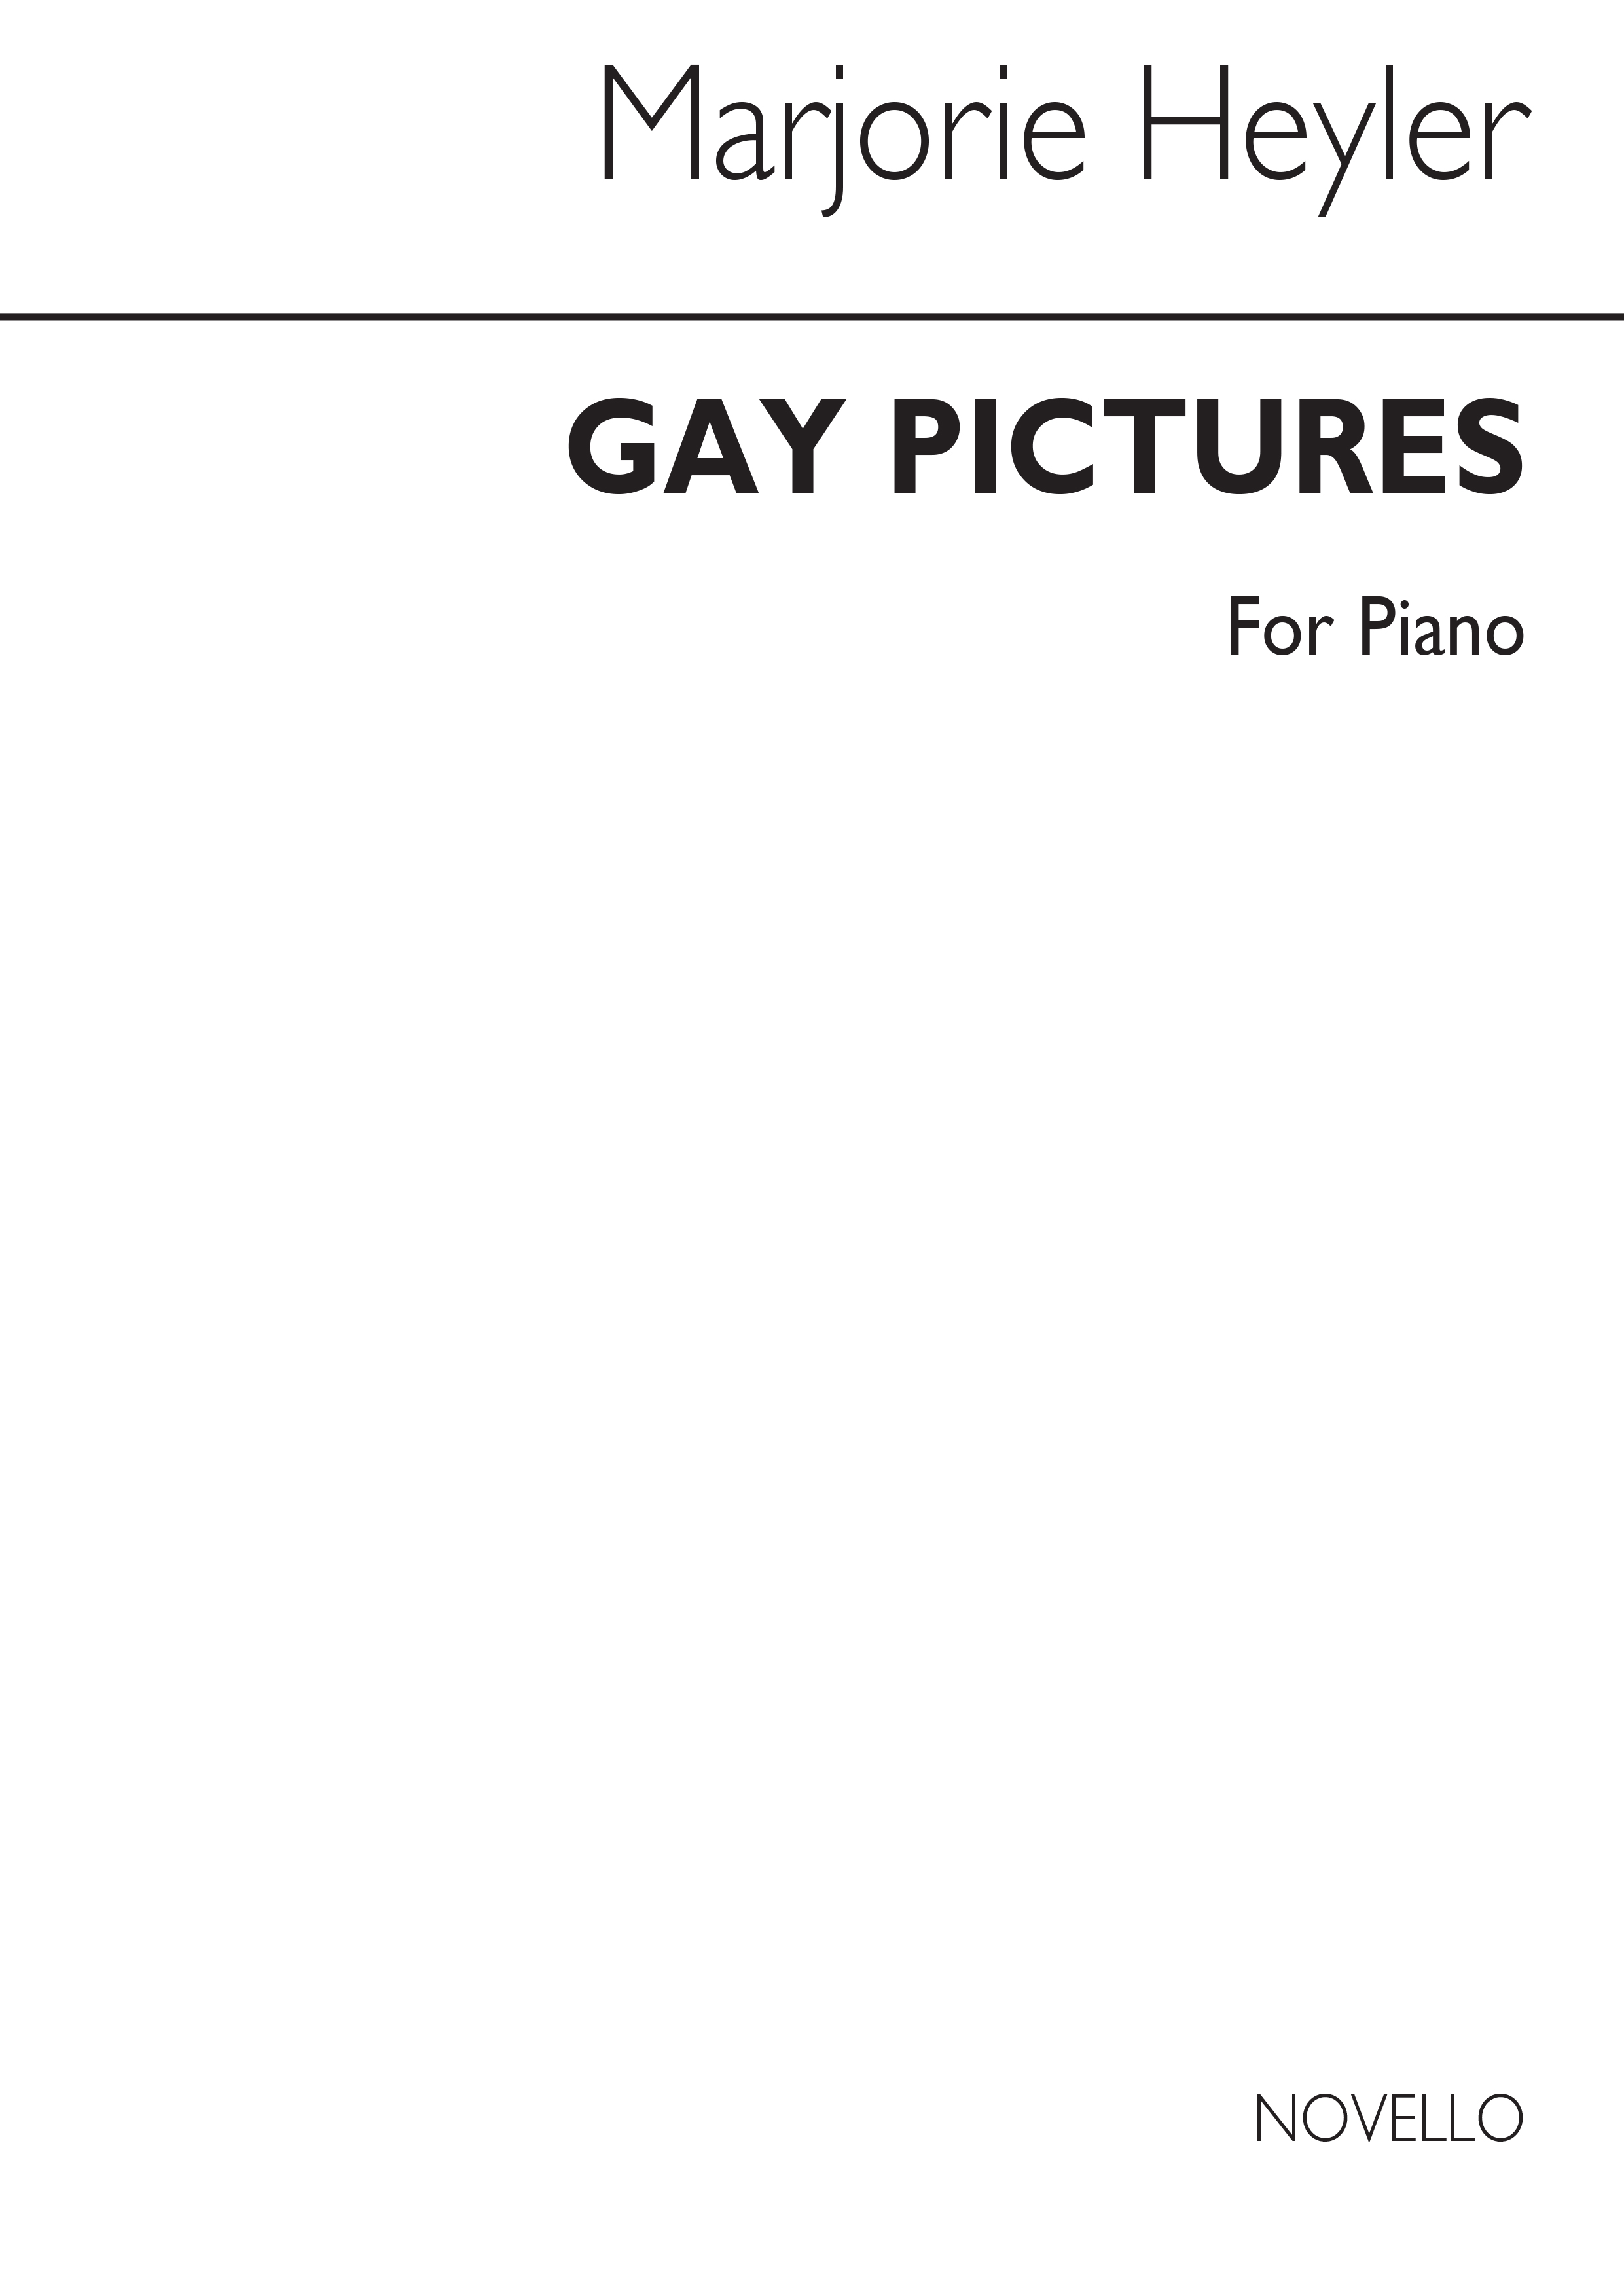 Helyer: Gay Pictures for Piano